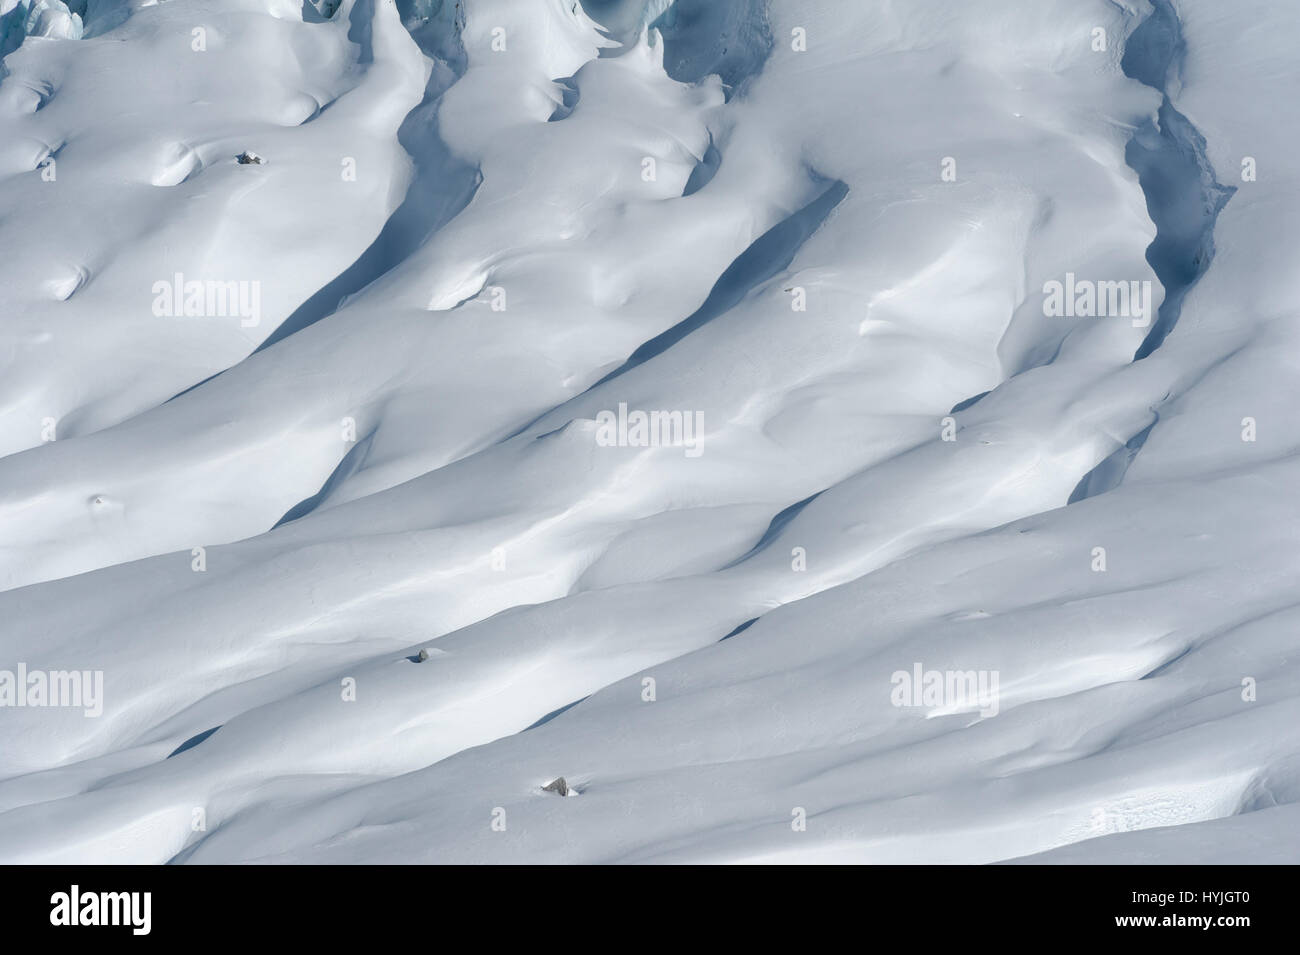 Close-up of Glacier d'Argentiere with snow covered crevasses and seracs formed while flowing down the valley in winter. Stock Photo